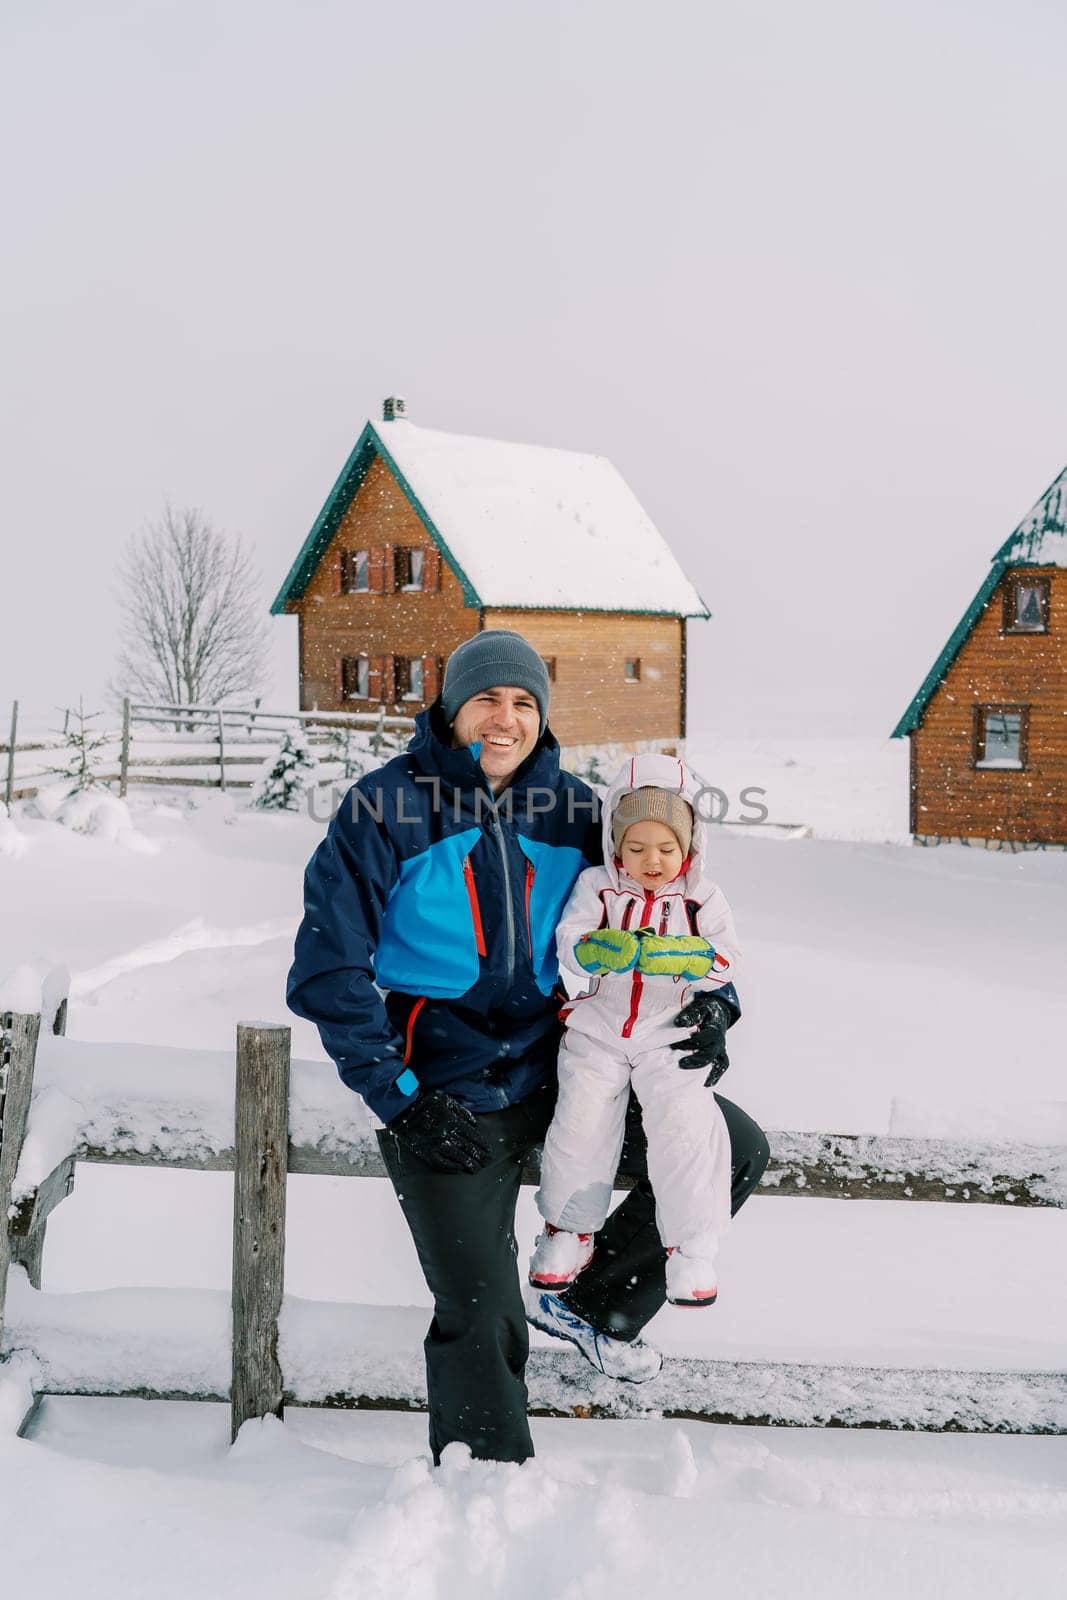 Smiling dad with a little girl on his lap sitting on a snow-covered fence in the village. High quality photo